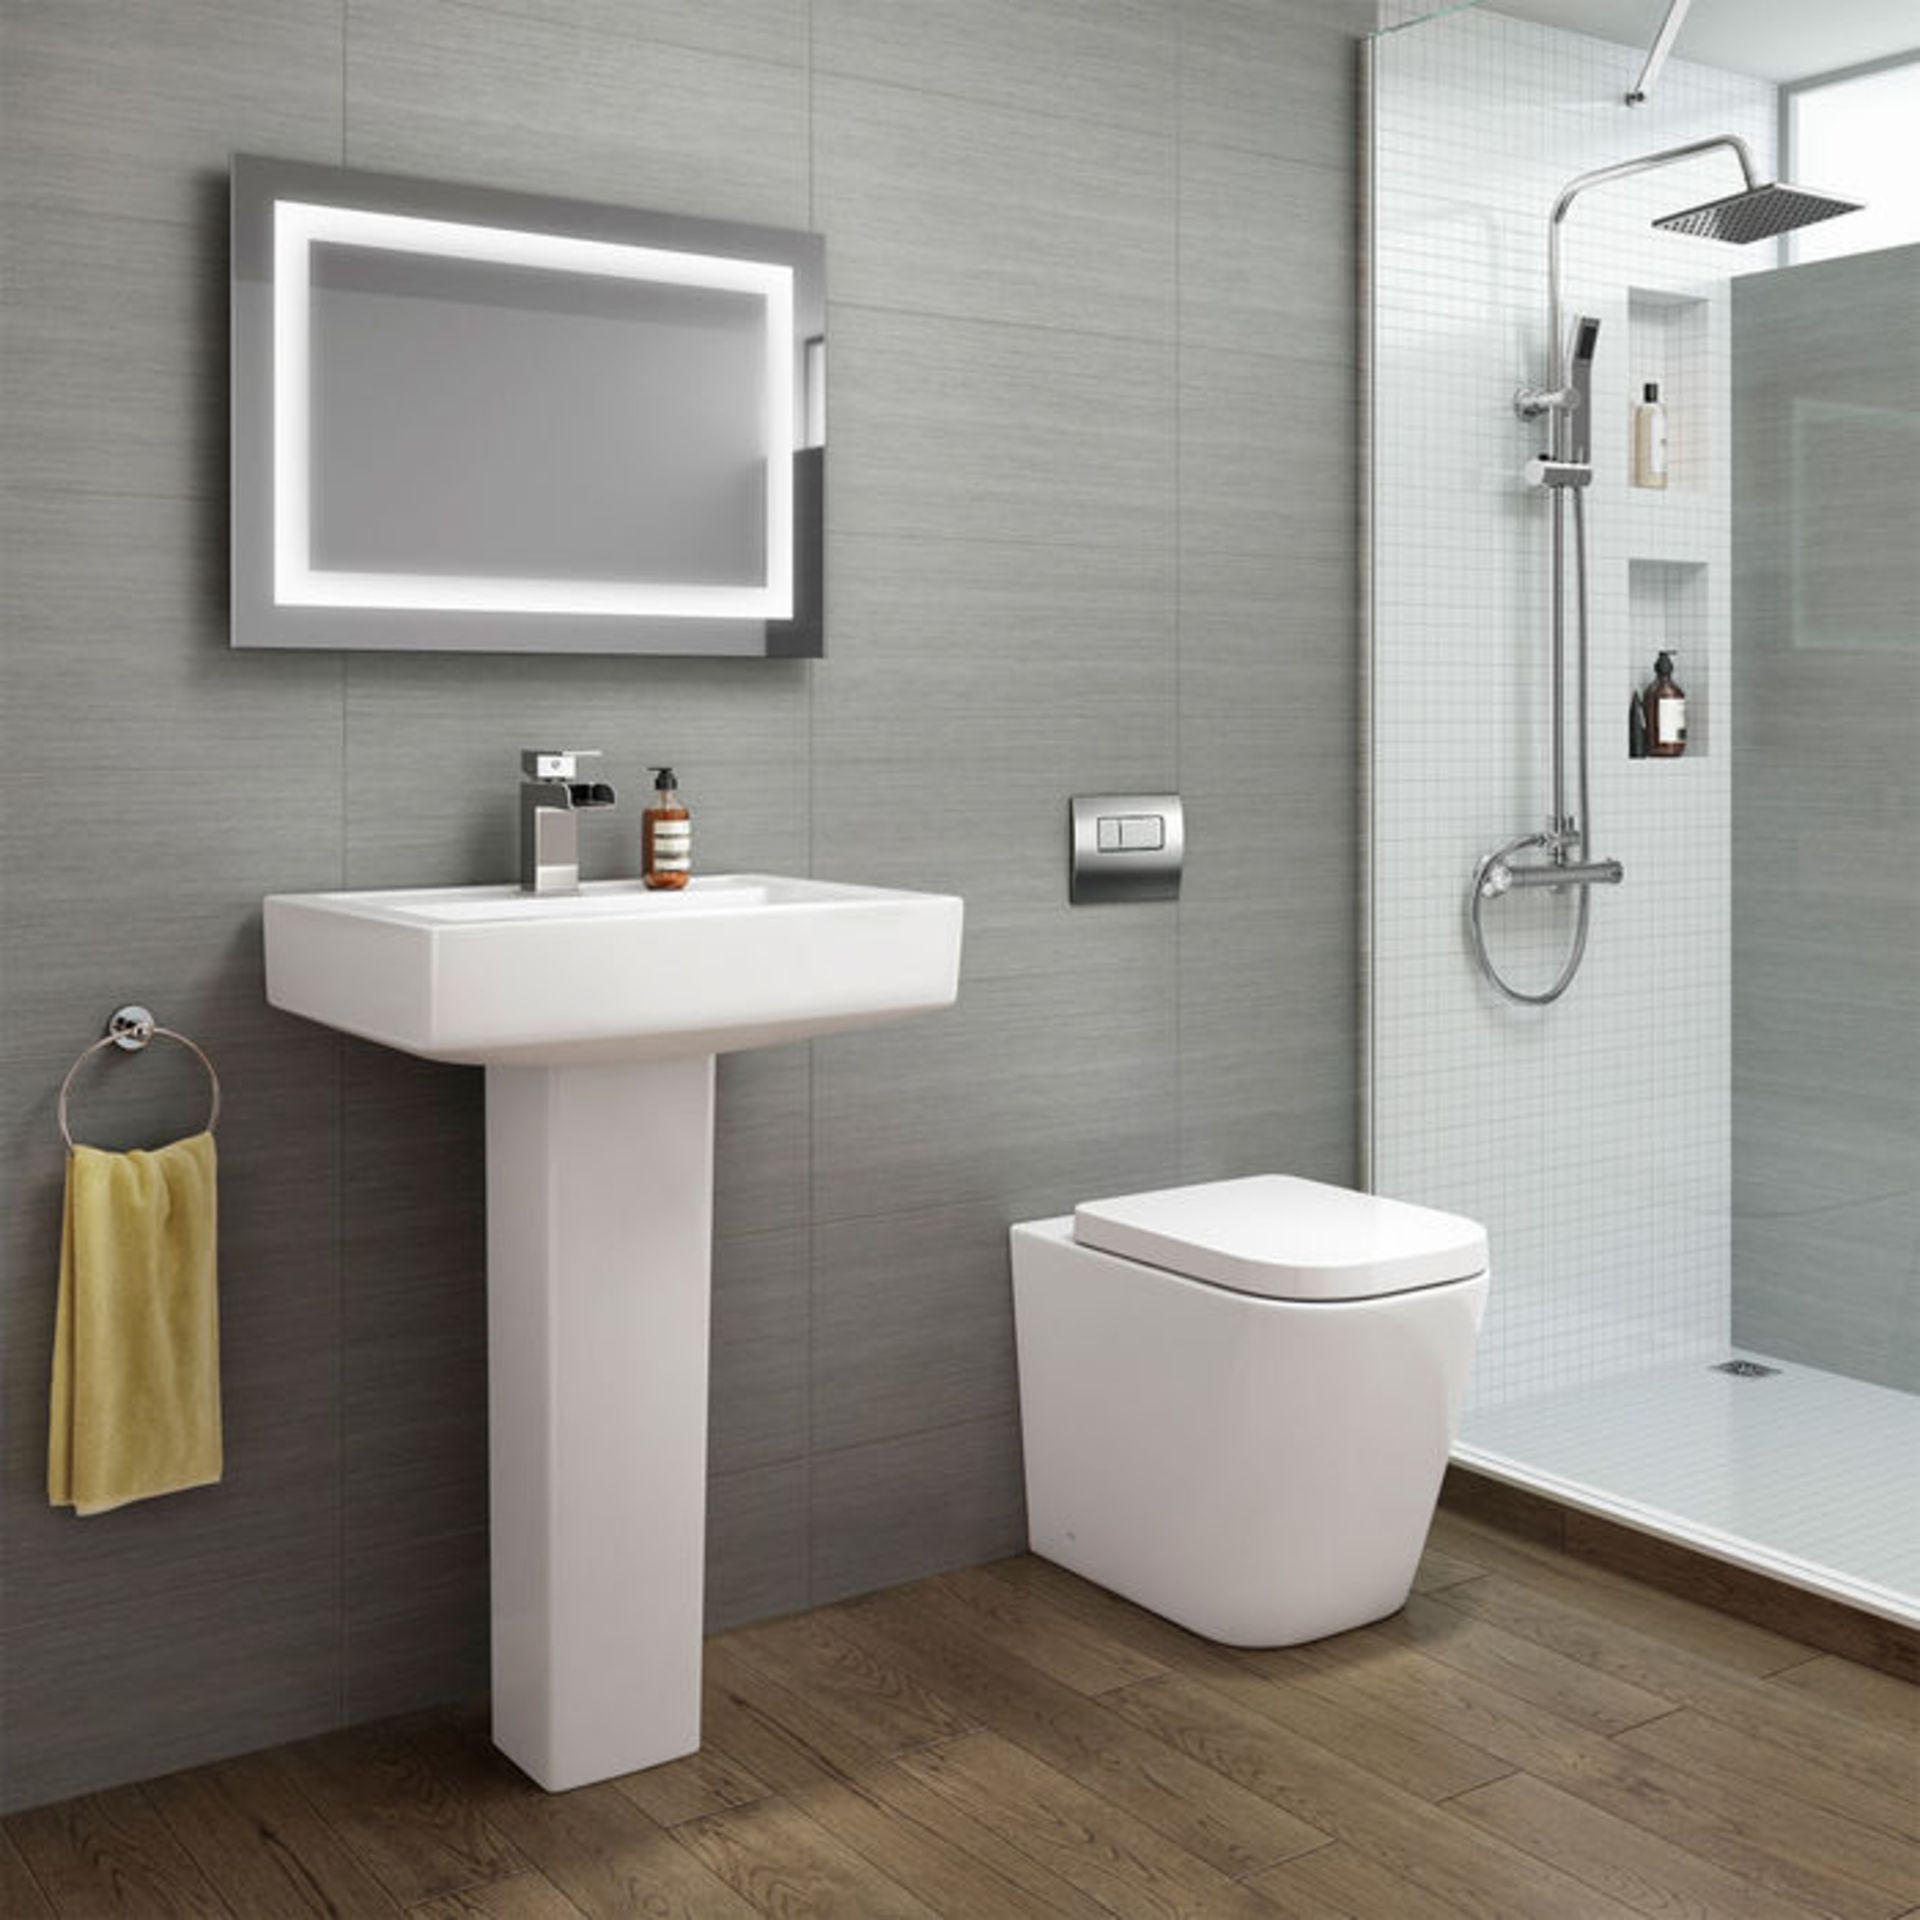 New Florence Rimless Back To Wall Toilet Inc Luxury Soft Close Seat Rimless Design Makes It Eas... - Image 2 of 2